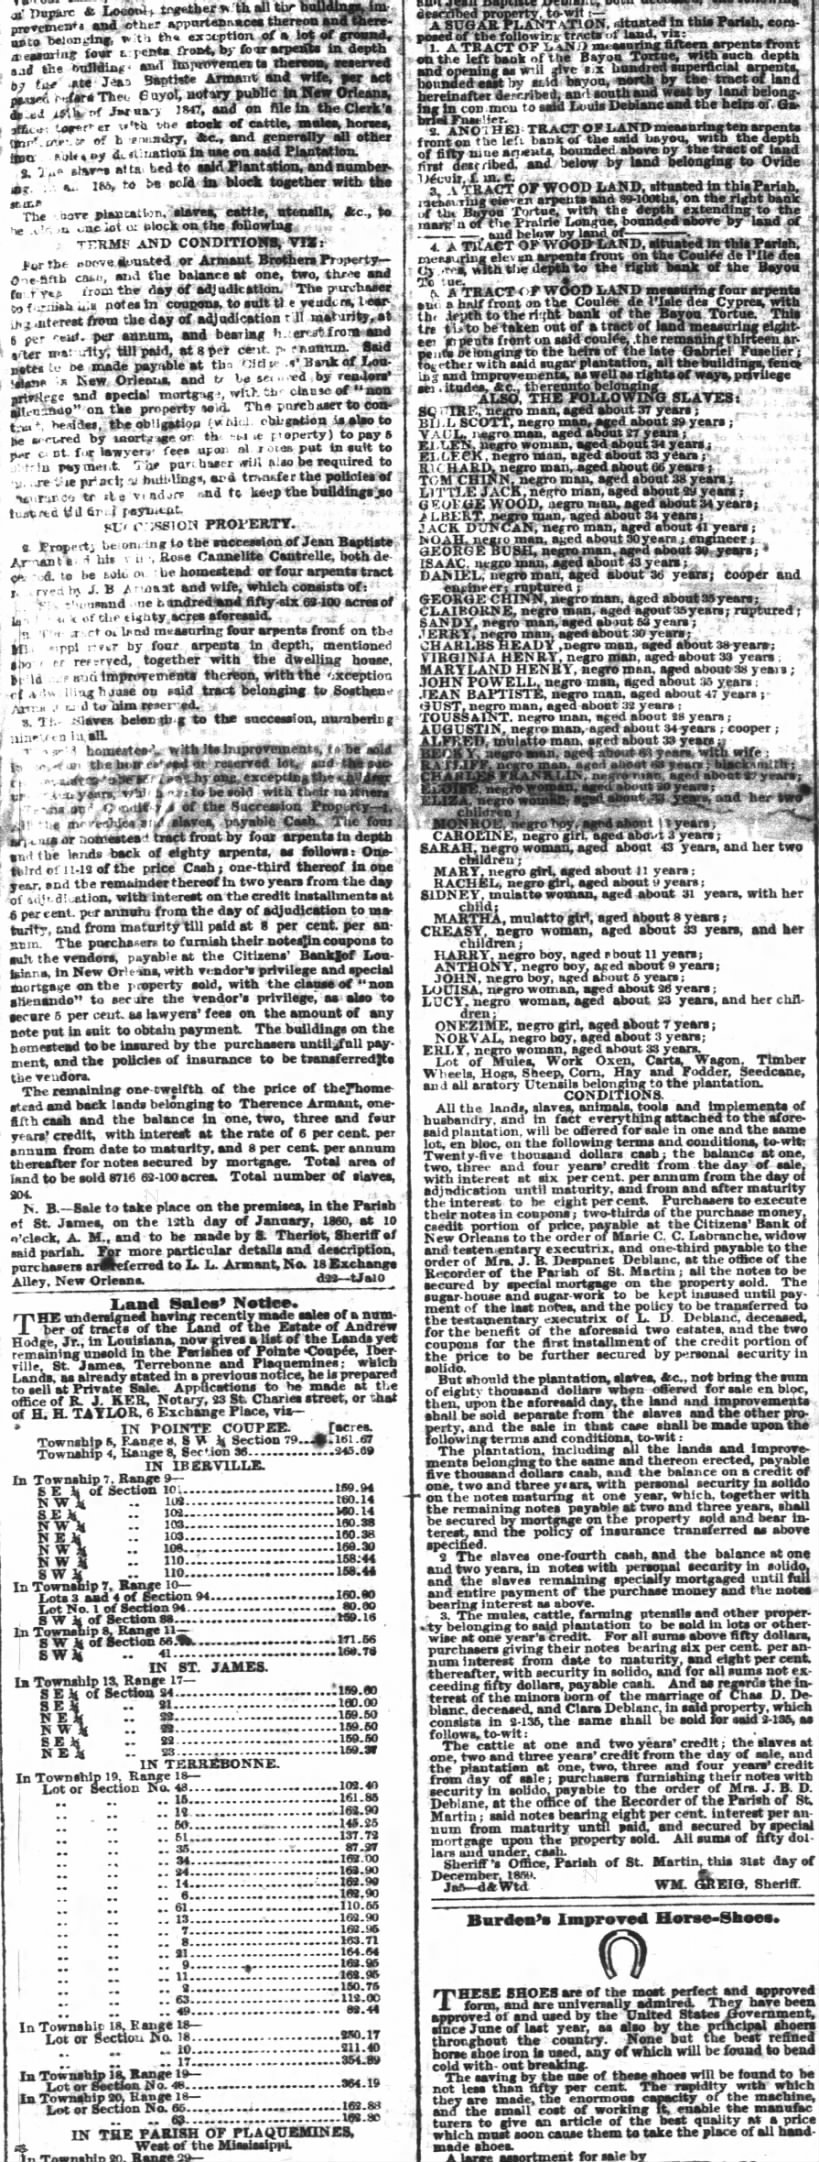 The Times-Picayune (New Oreleans, Louisiana) 10 Jan 1860 Sucession Records showws slaves